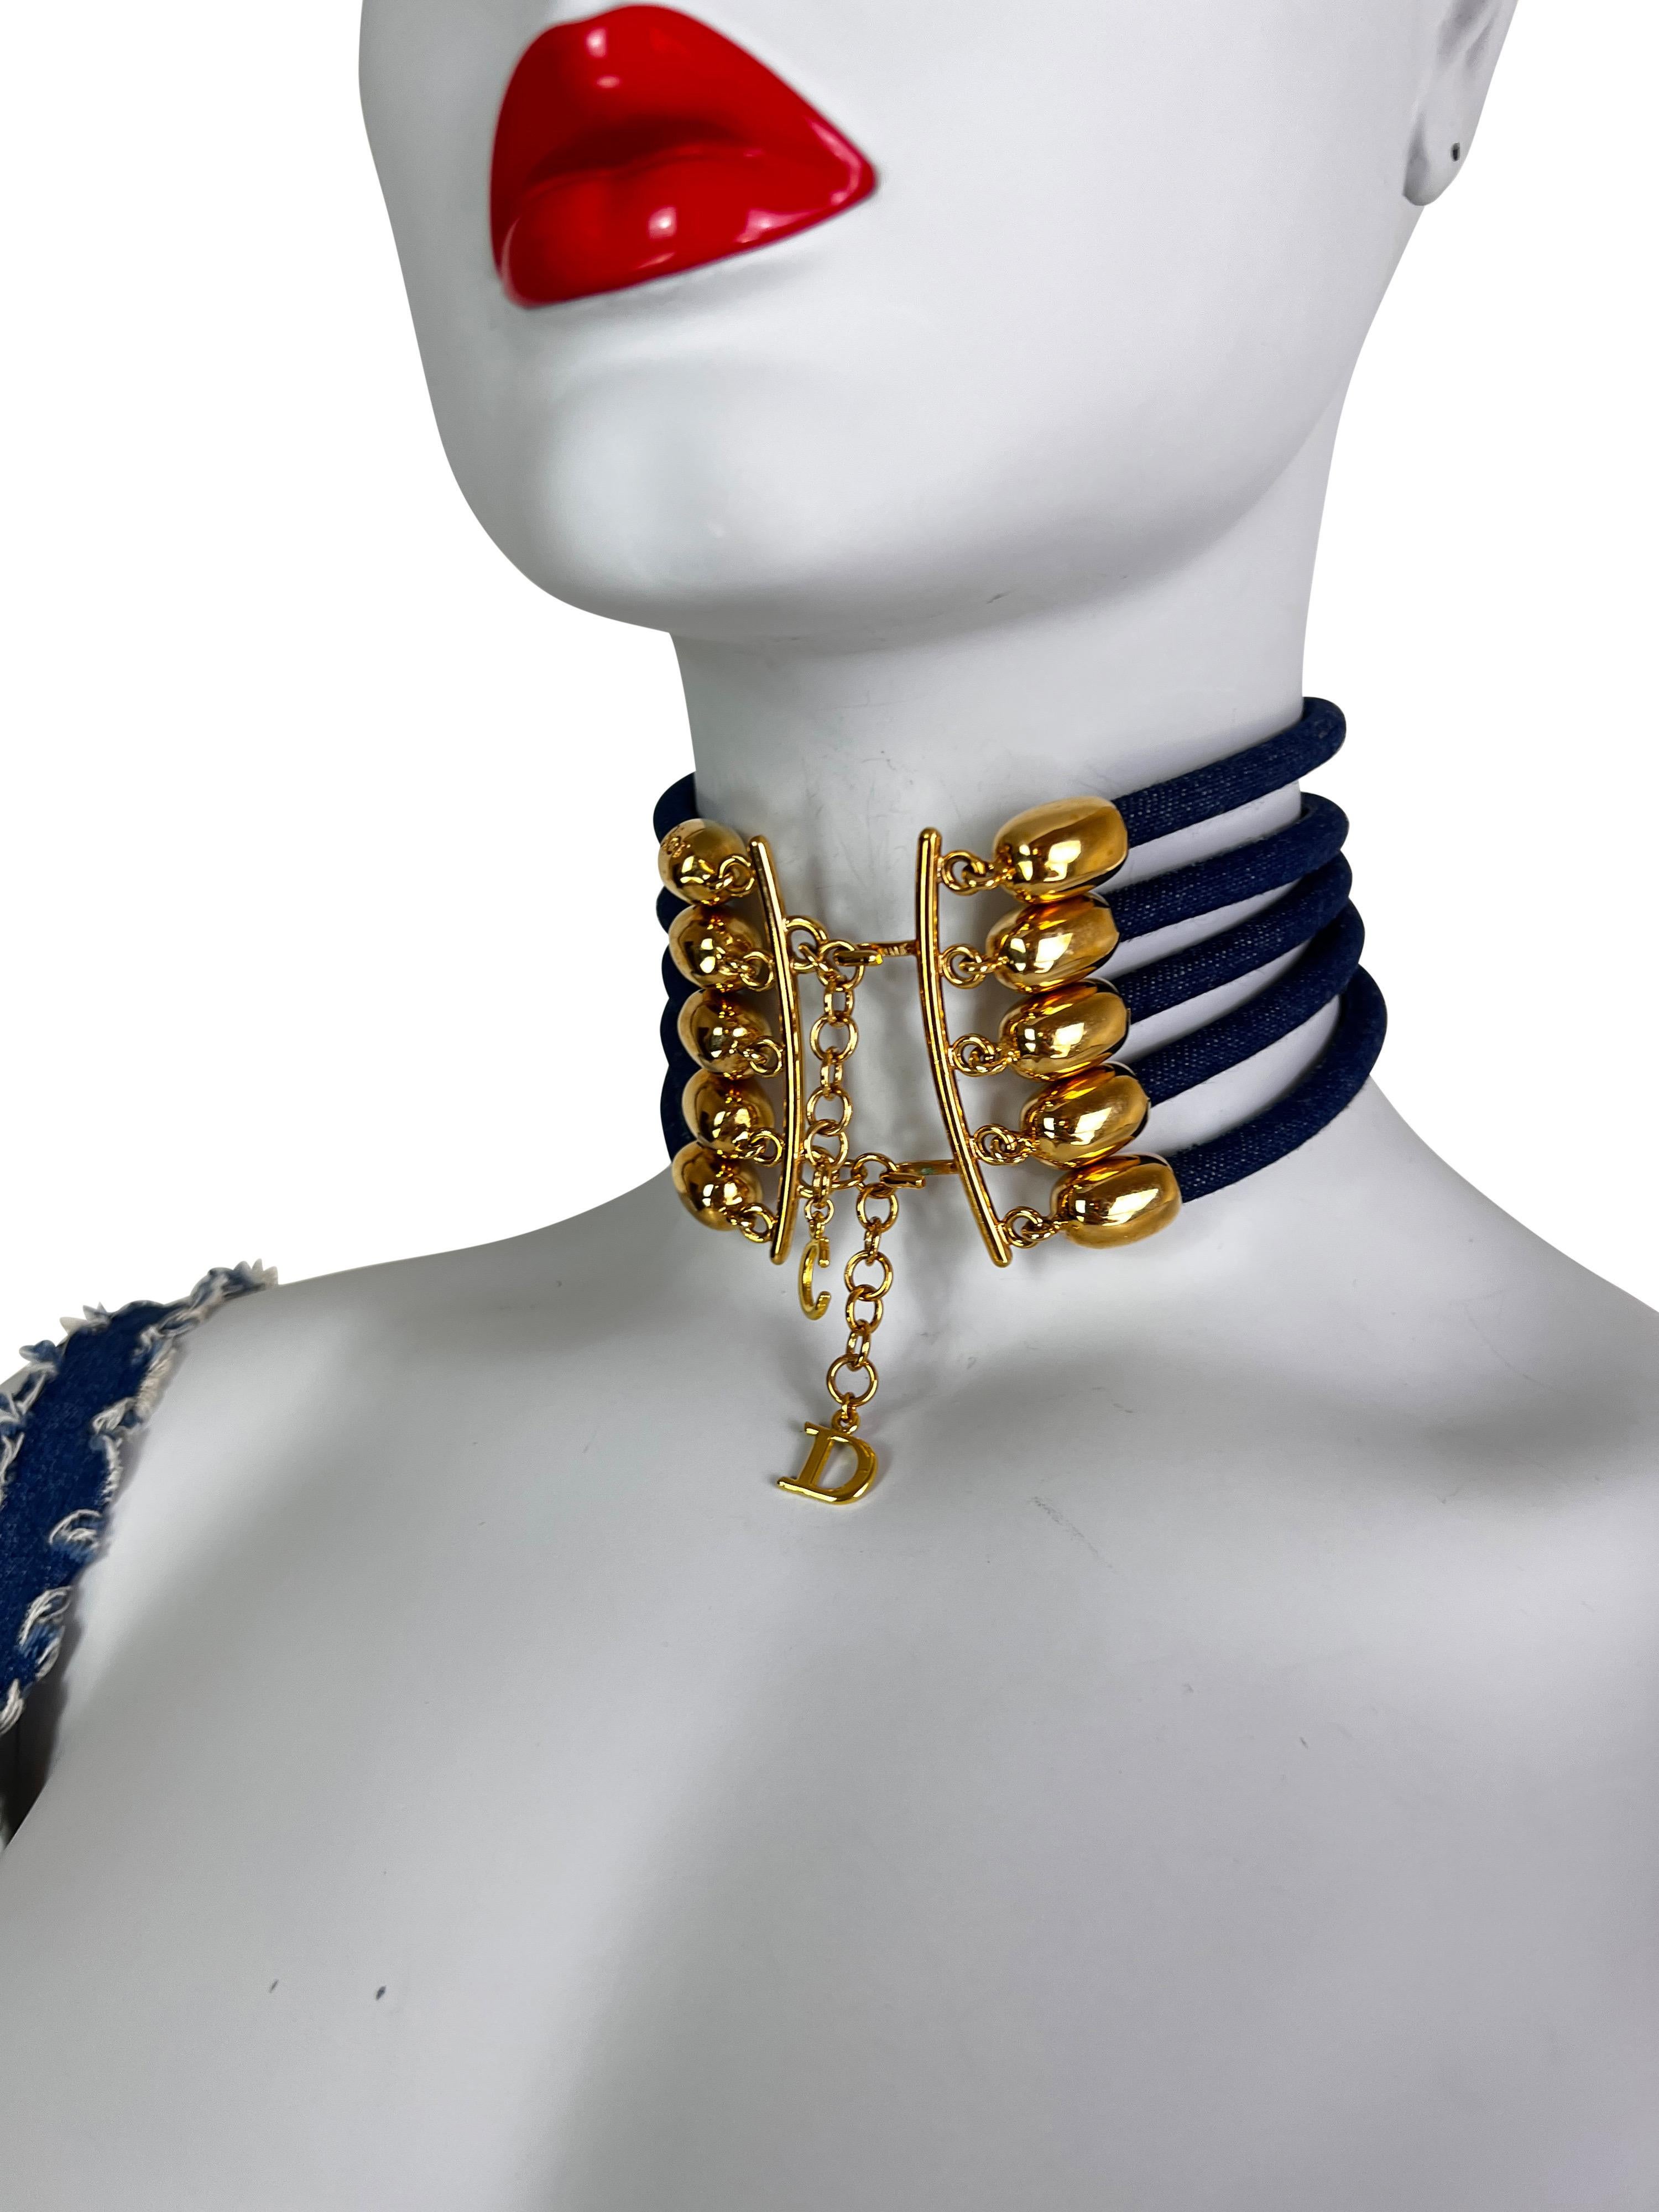 Dior by John Galliano Spring 2000 Denim Multistrand CD Choker In Excellent Condition For Sale In Prague, CZ